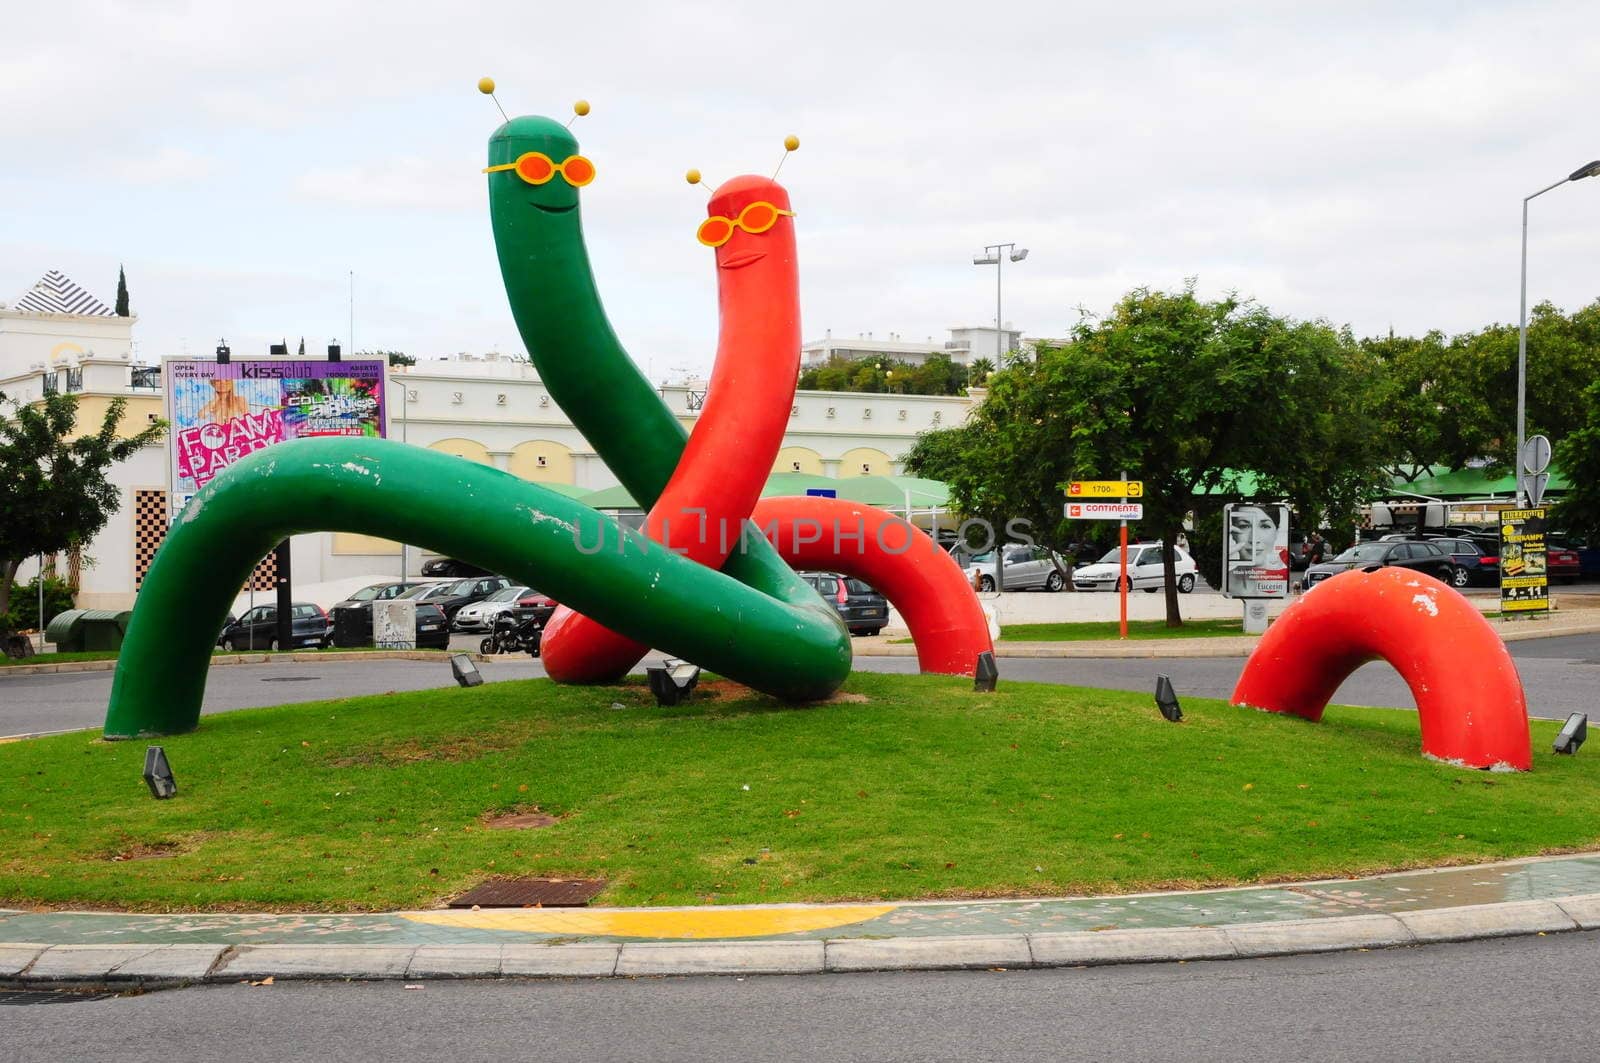 Giant worm art in Portugal